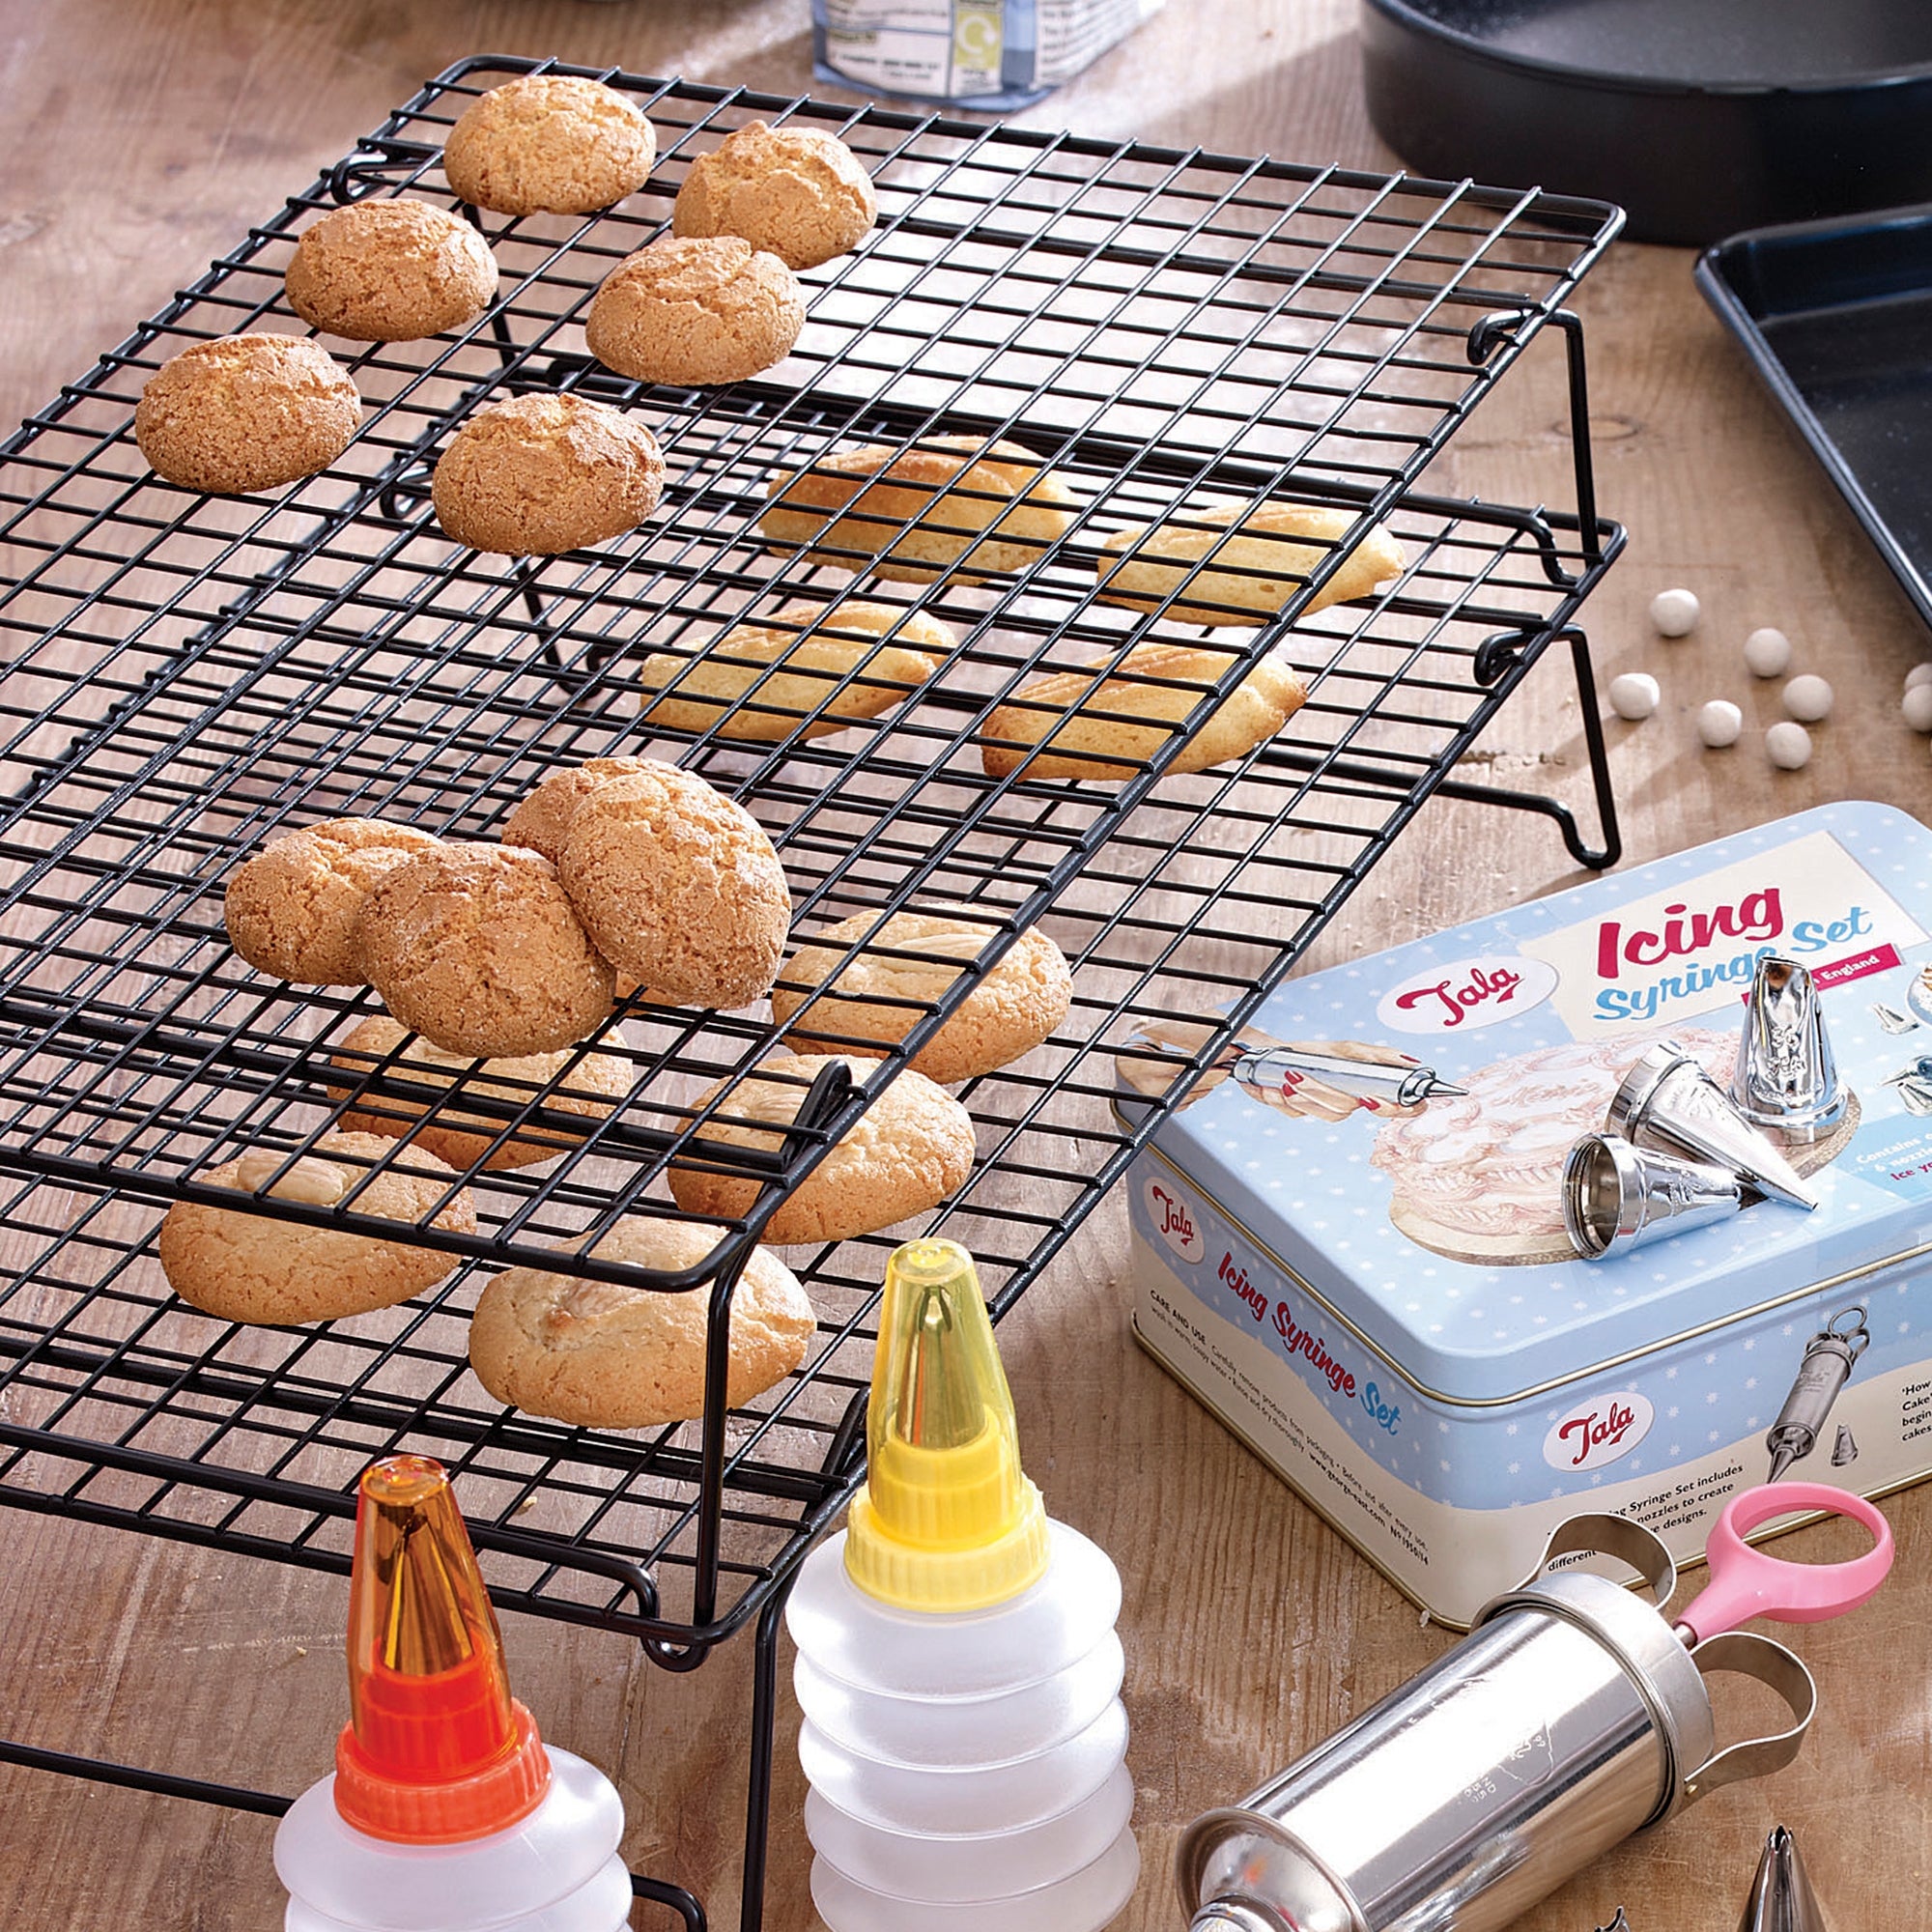 Non-Stick Cooling Baking Wire Grid Rack, Shop Today. Get it Tomorrow!